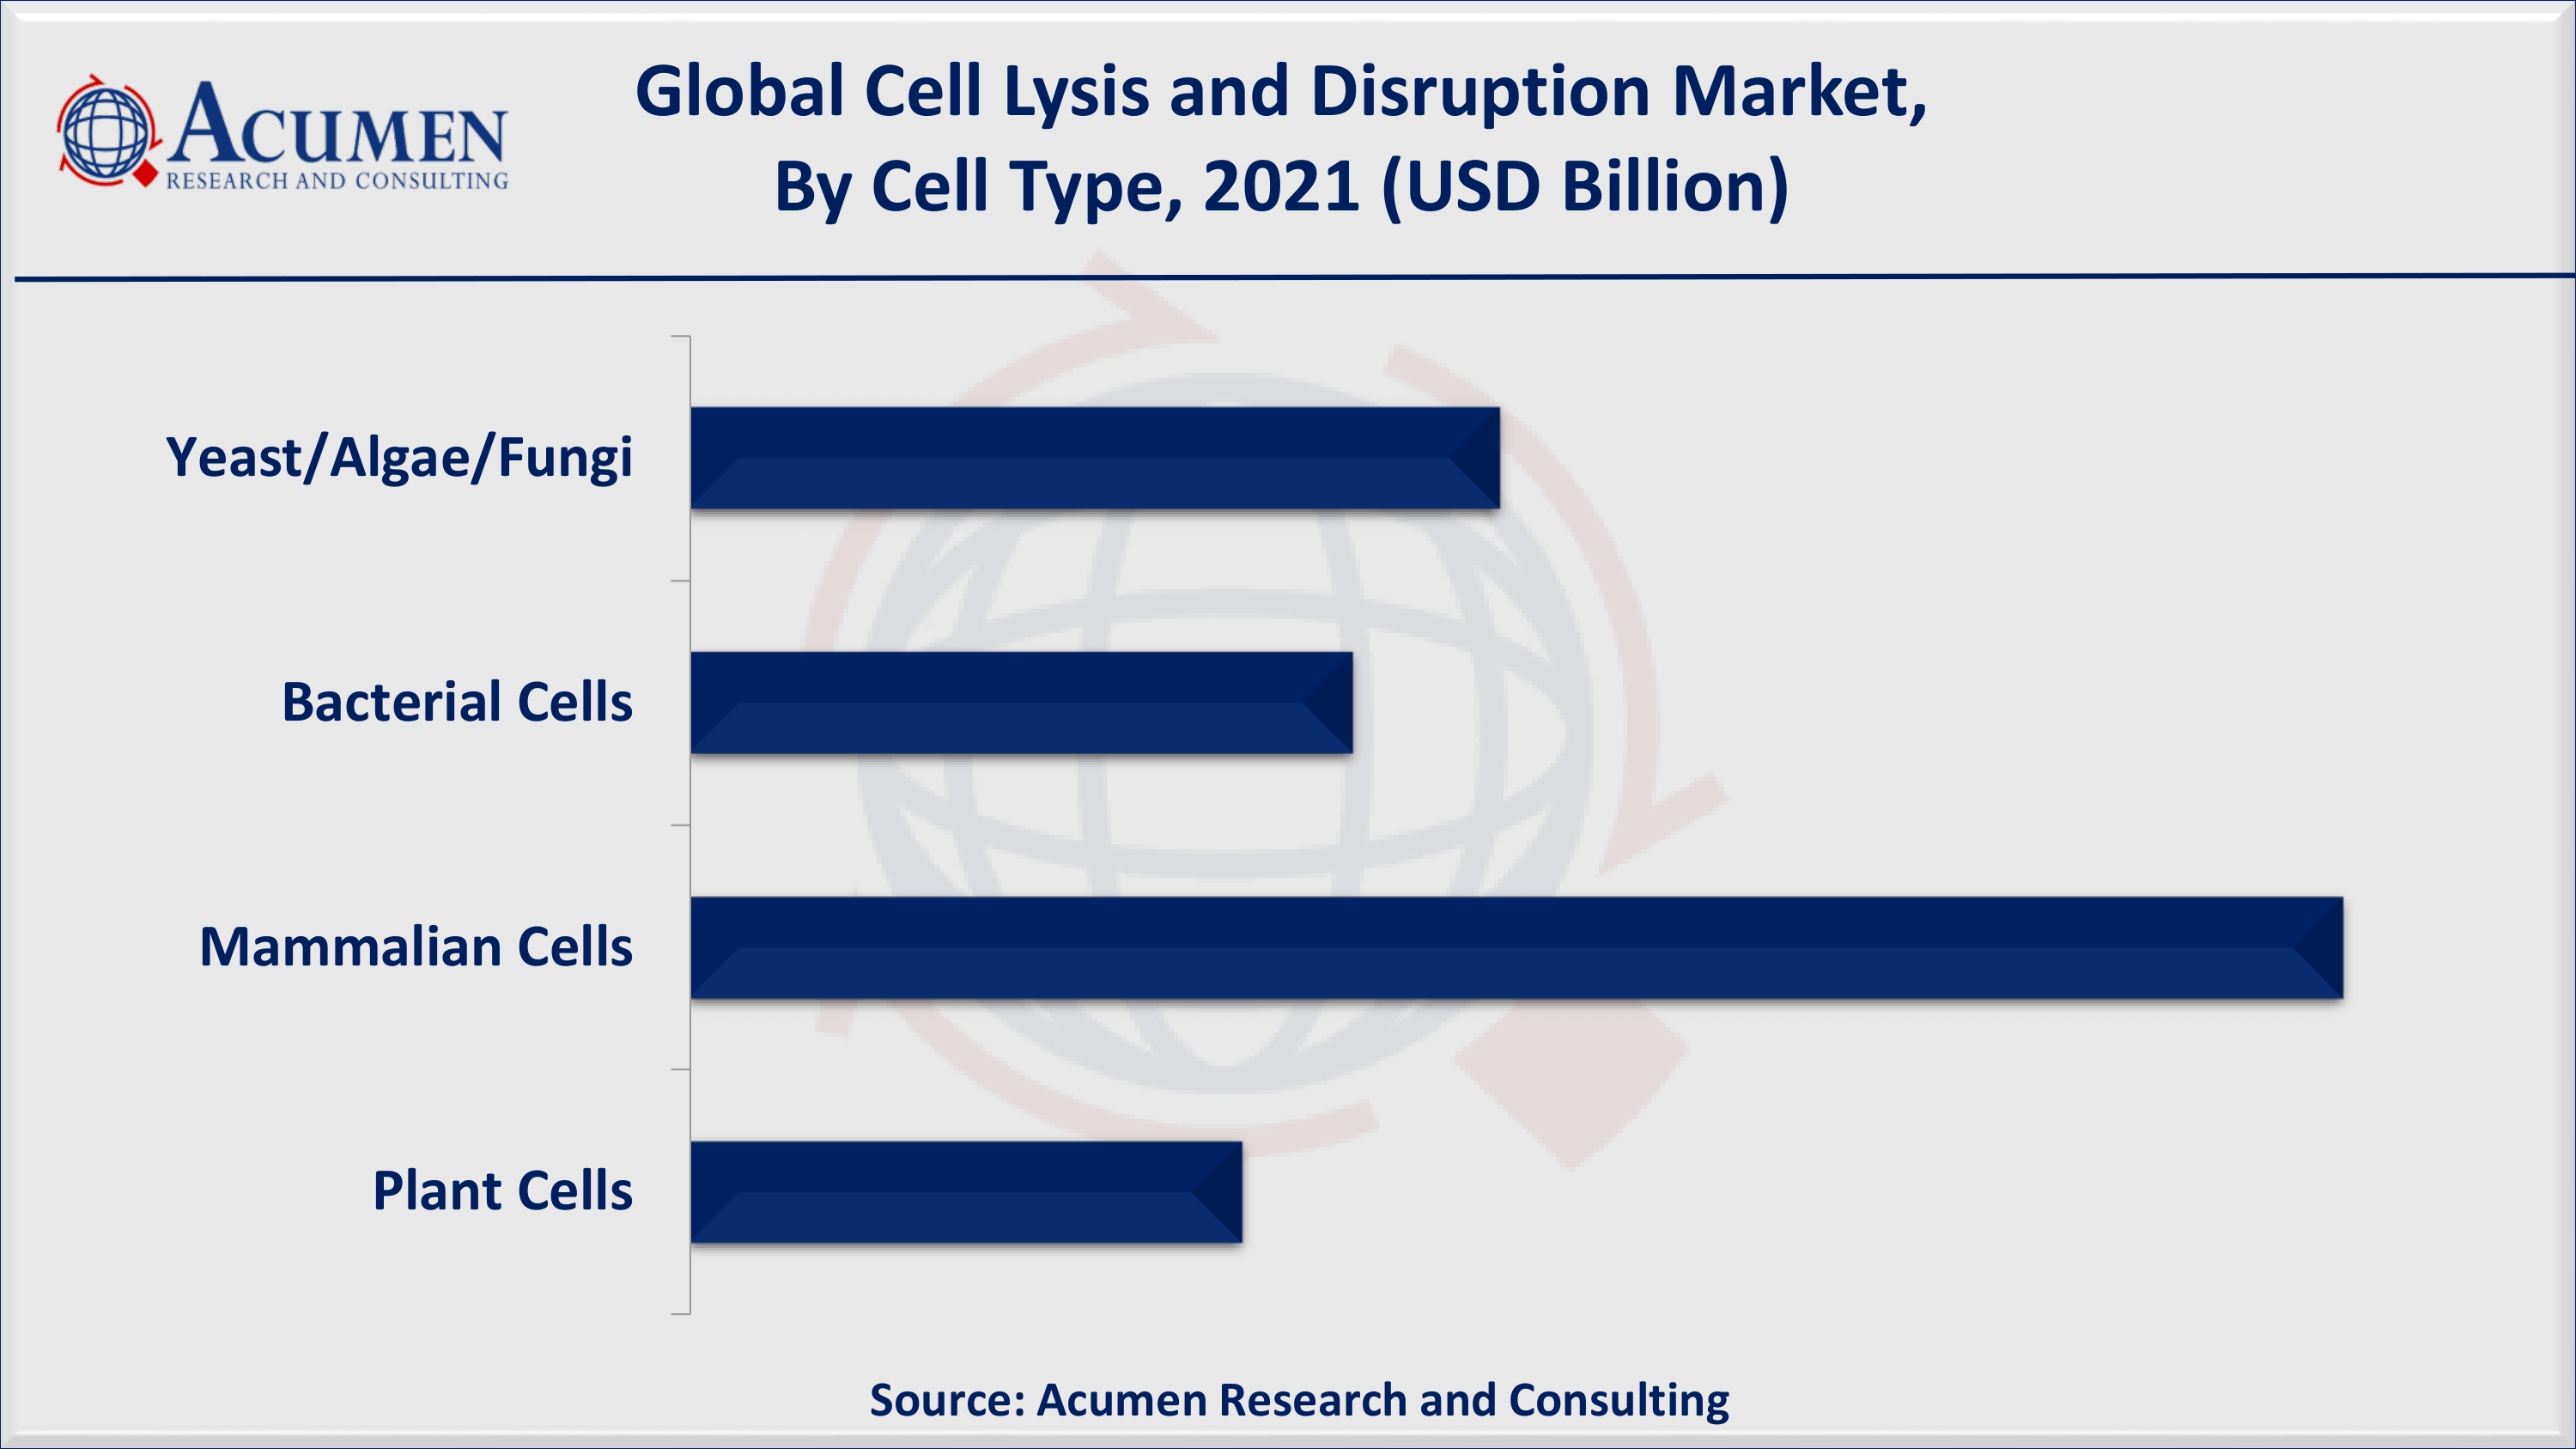 On the basis of cell type, mammalian cells generated revenue over USD 2 billion in 2021